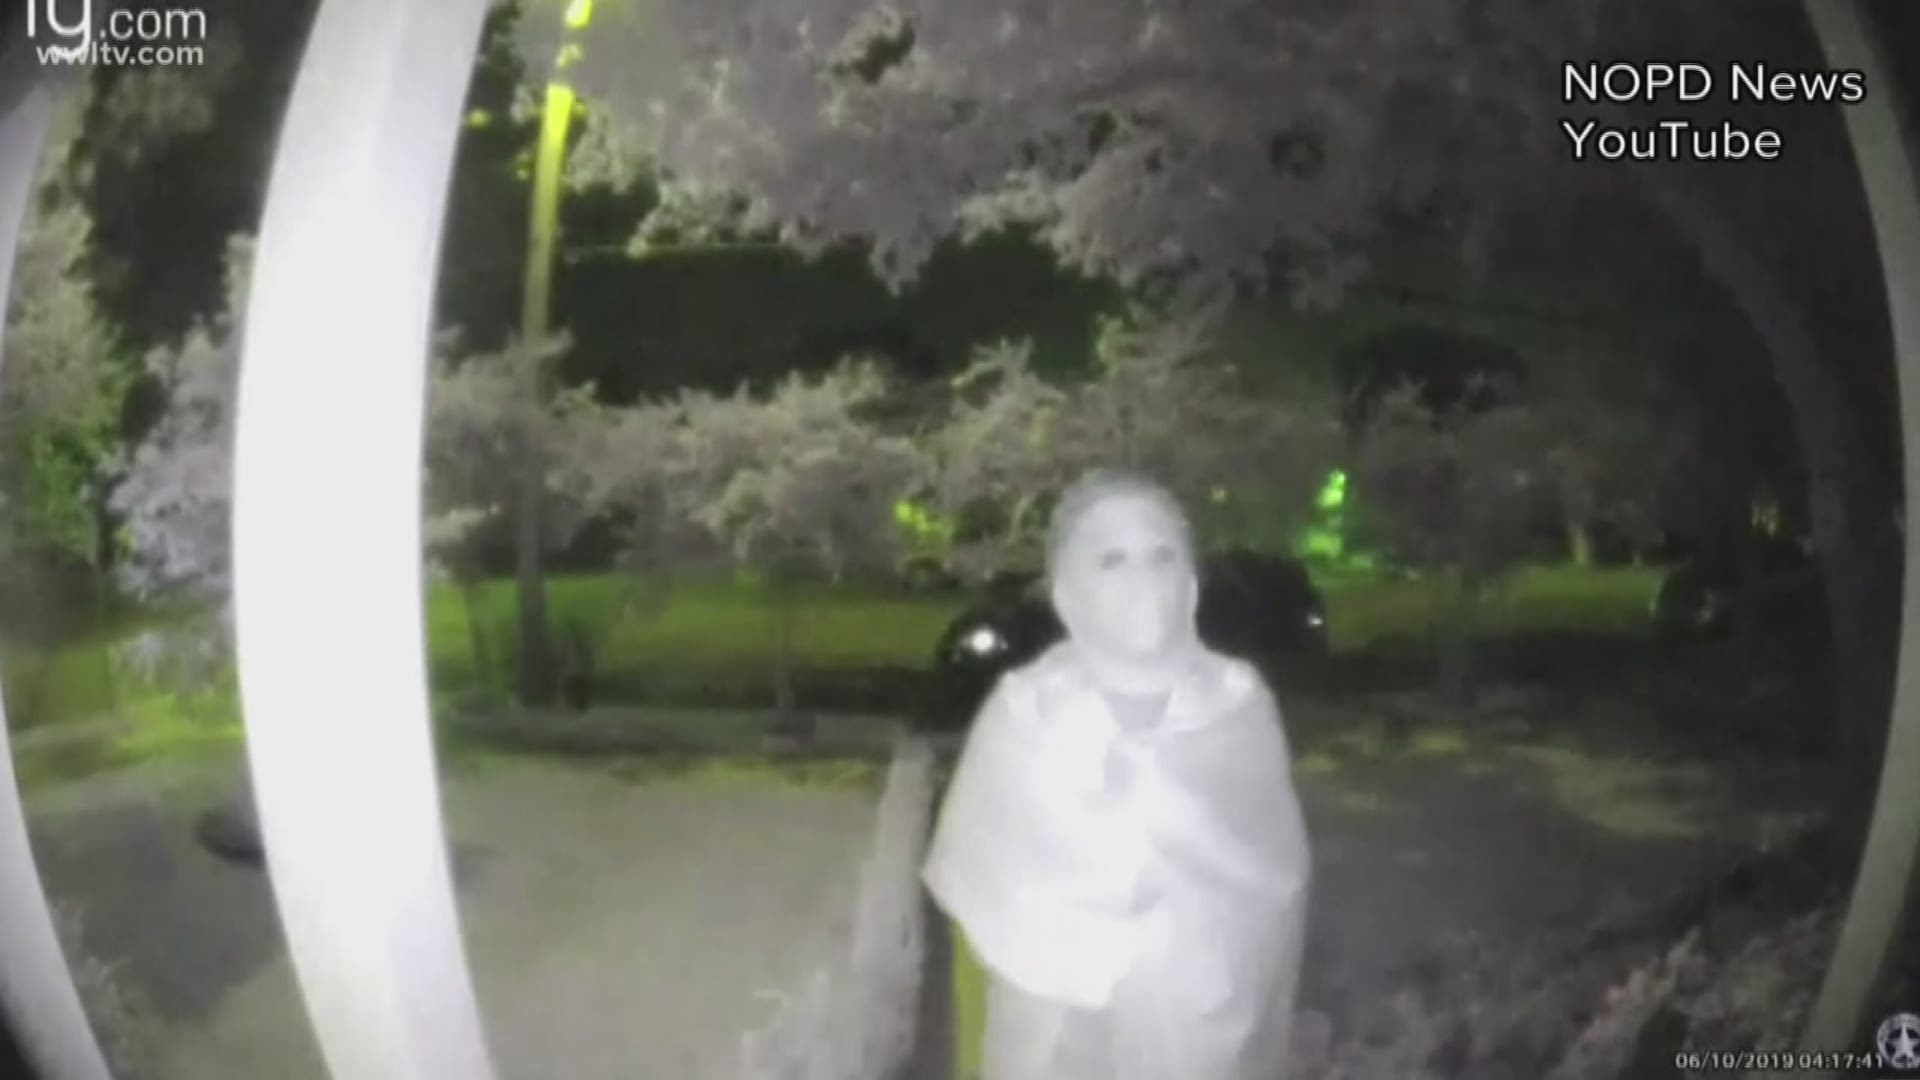 New Orleans Police are investigating a bizarre, and somewhat scary theft that has people talking. You'll understand why when you see the surveillance video.